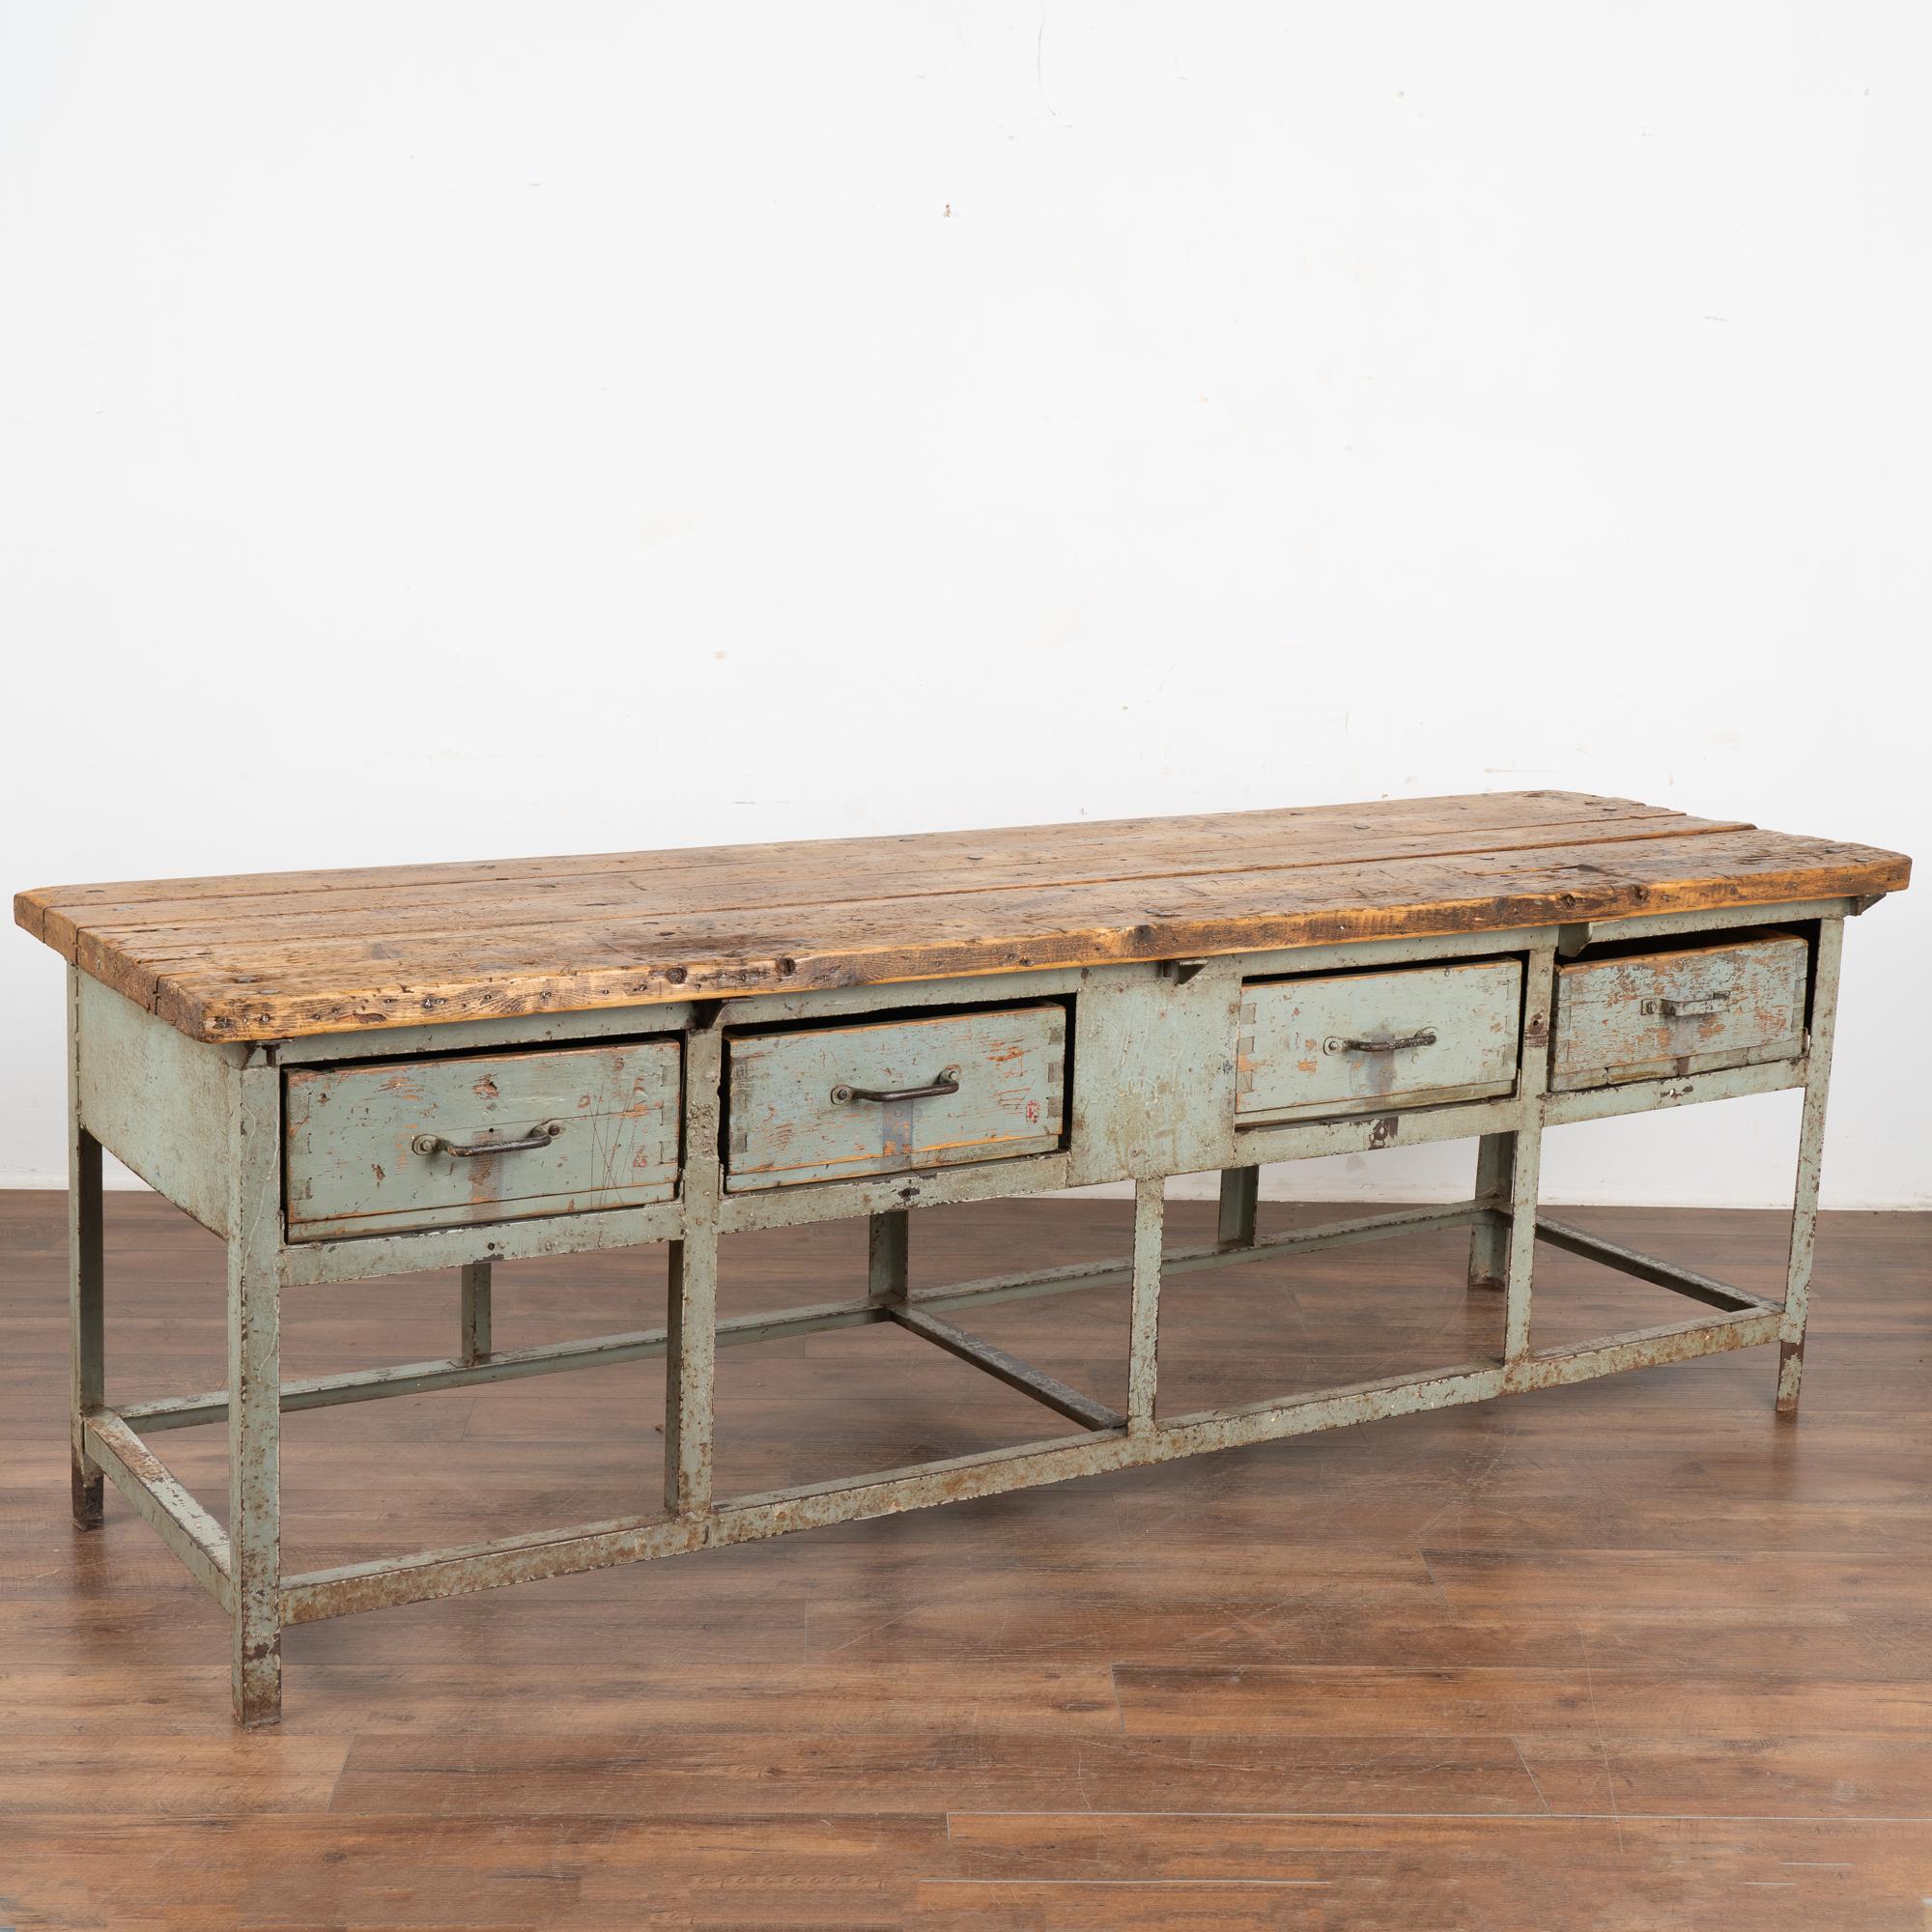 This long rustic work table is a great find at almost 8' length with an industrial painted metal base, rugged wood top and deep wood drawers.
The generations of use are revealed in every nick, gouge, stain, hole and crack that add to the deep